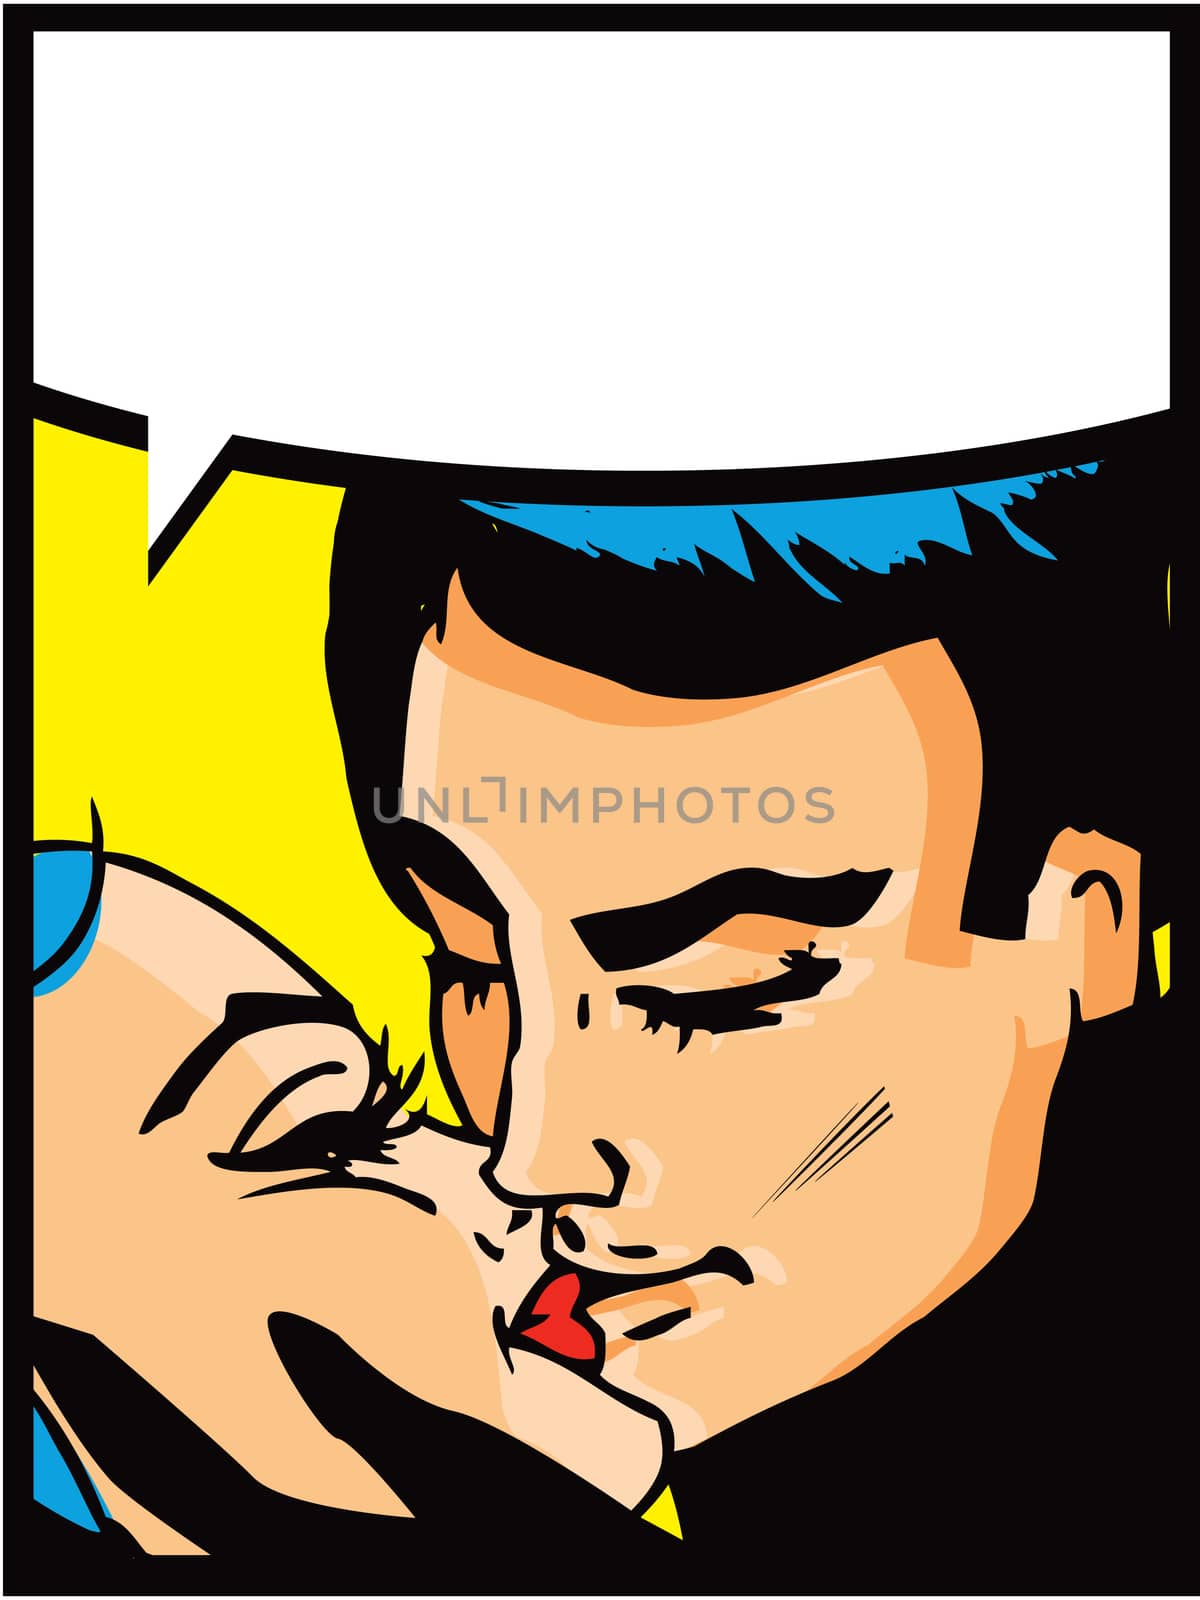 Lovers: Kissing couple man and woman in pop art comic style by IconsJewelry